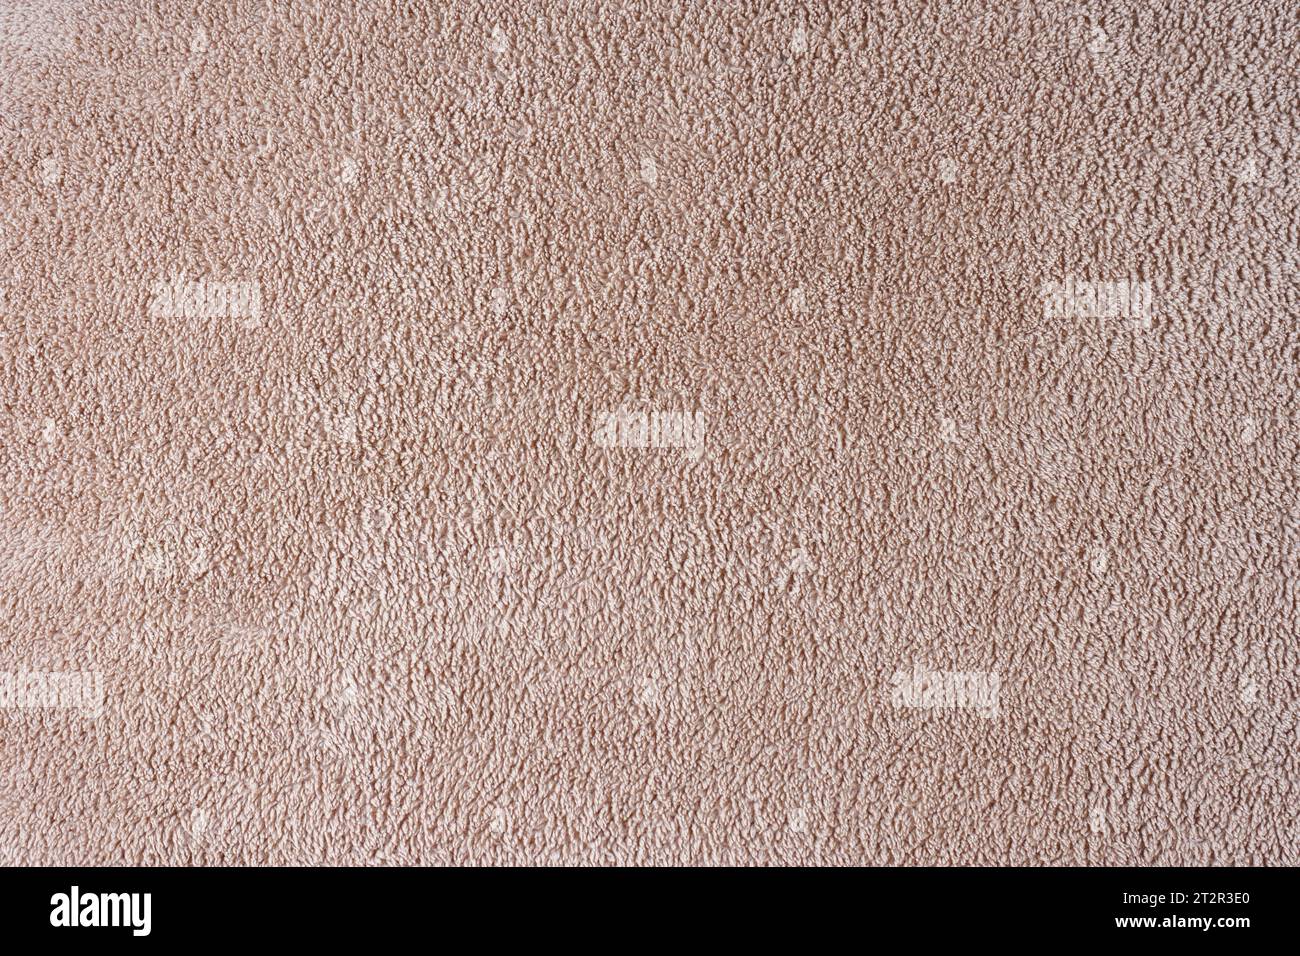 Terry cloth, beige towel texture background. Soft fluffy textile bath or beach towel material. Top view, close up. Stock Photo